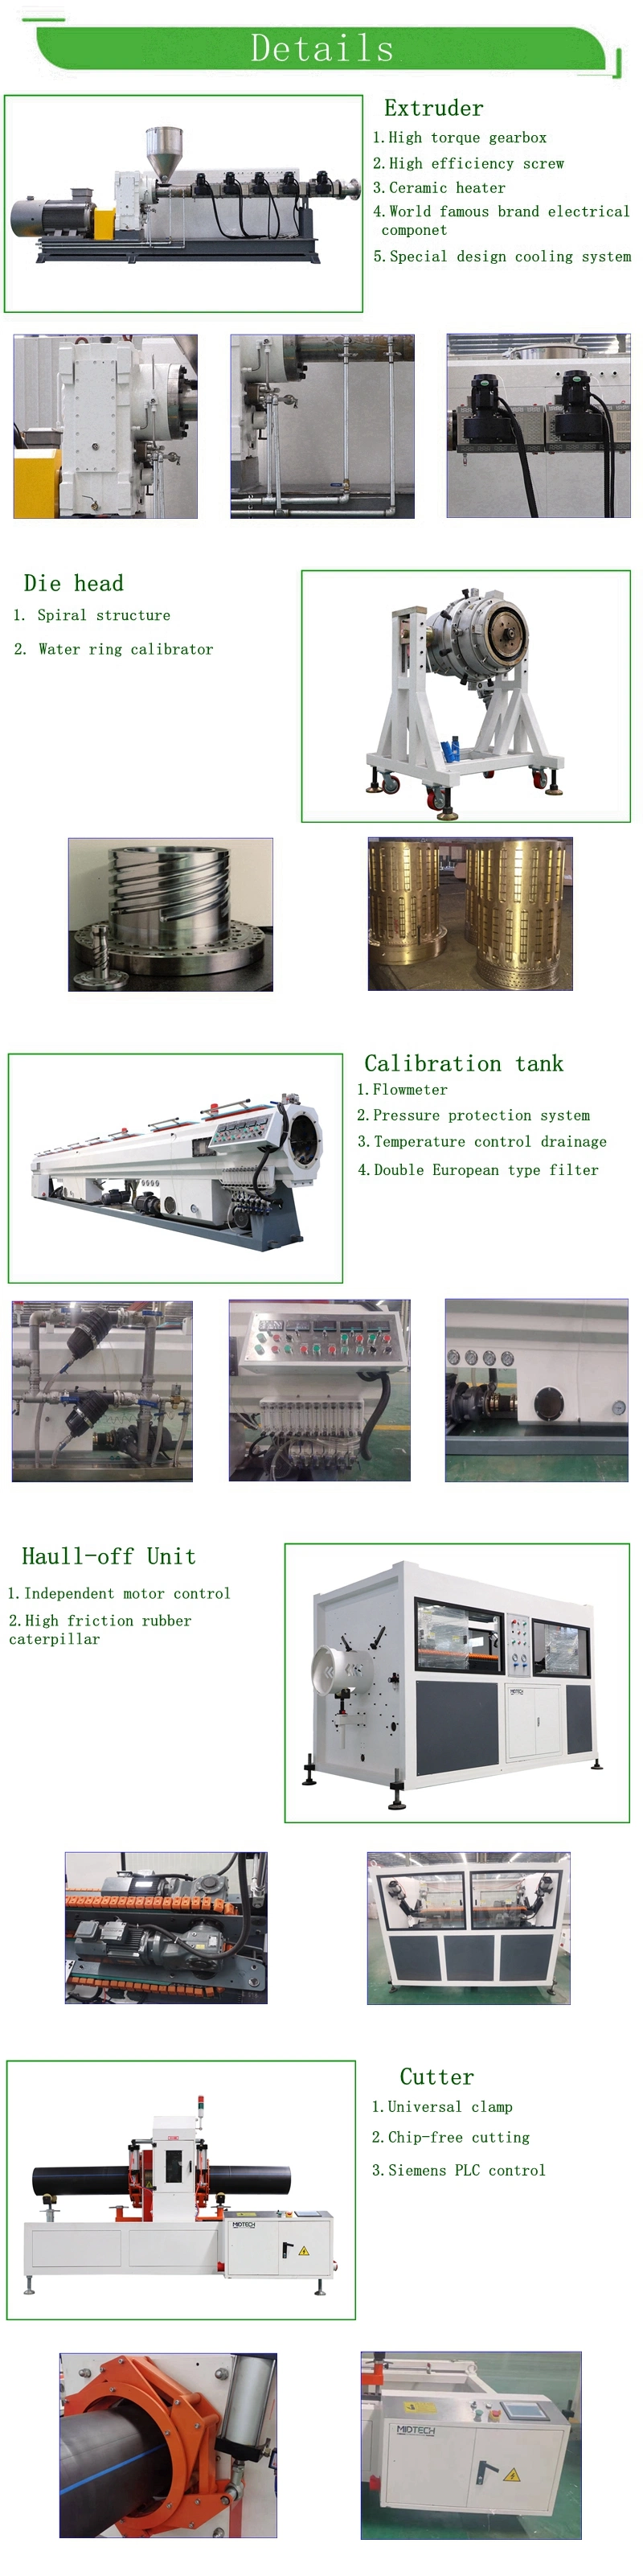 Plastic PVC/UPVC/CPVC/HDPE/PPR/LDPE/ Drip Irrigation/Conduit Cable/Layflat/Sewage Pipe Tube Extruder/Extrusion Bending Production Line Making Machine Price